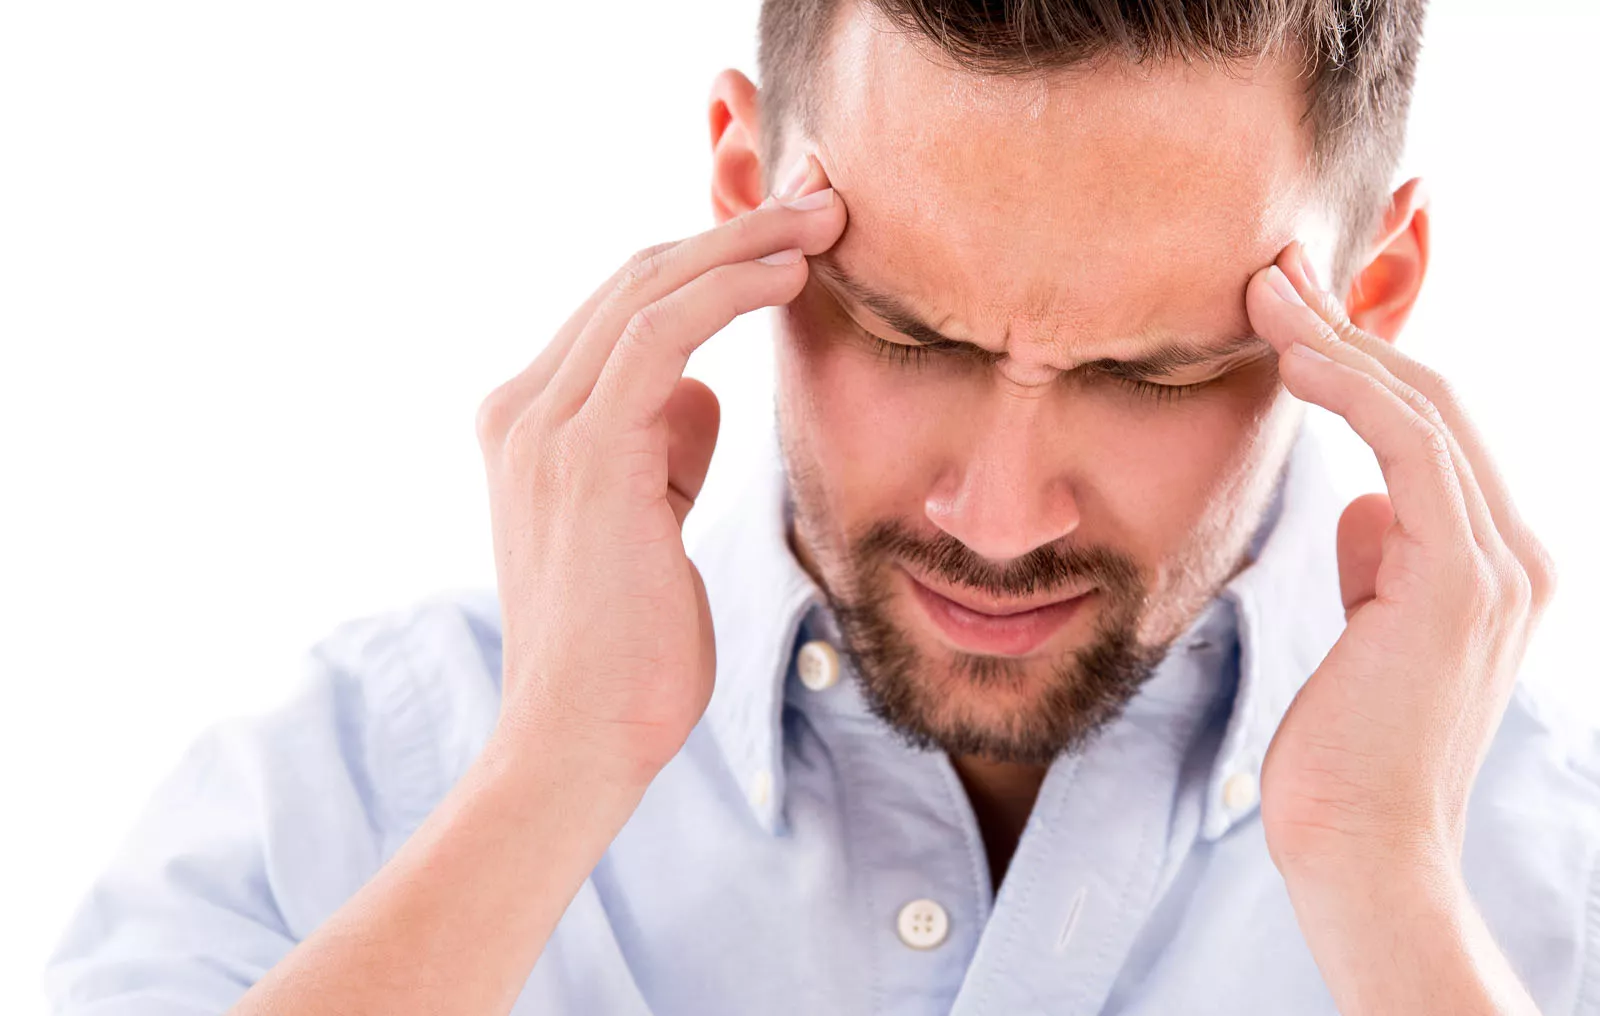 What causes headache? What are the methods to relieve headache?